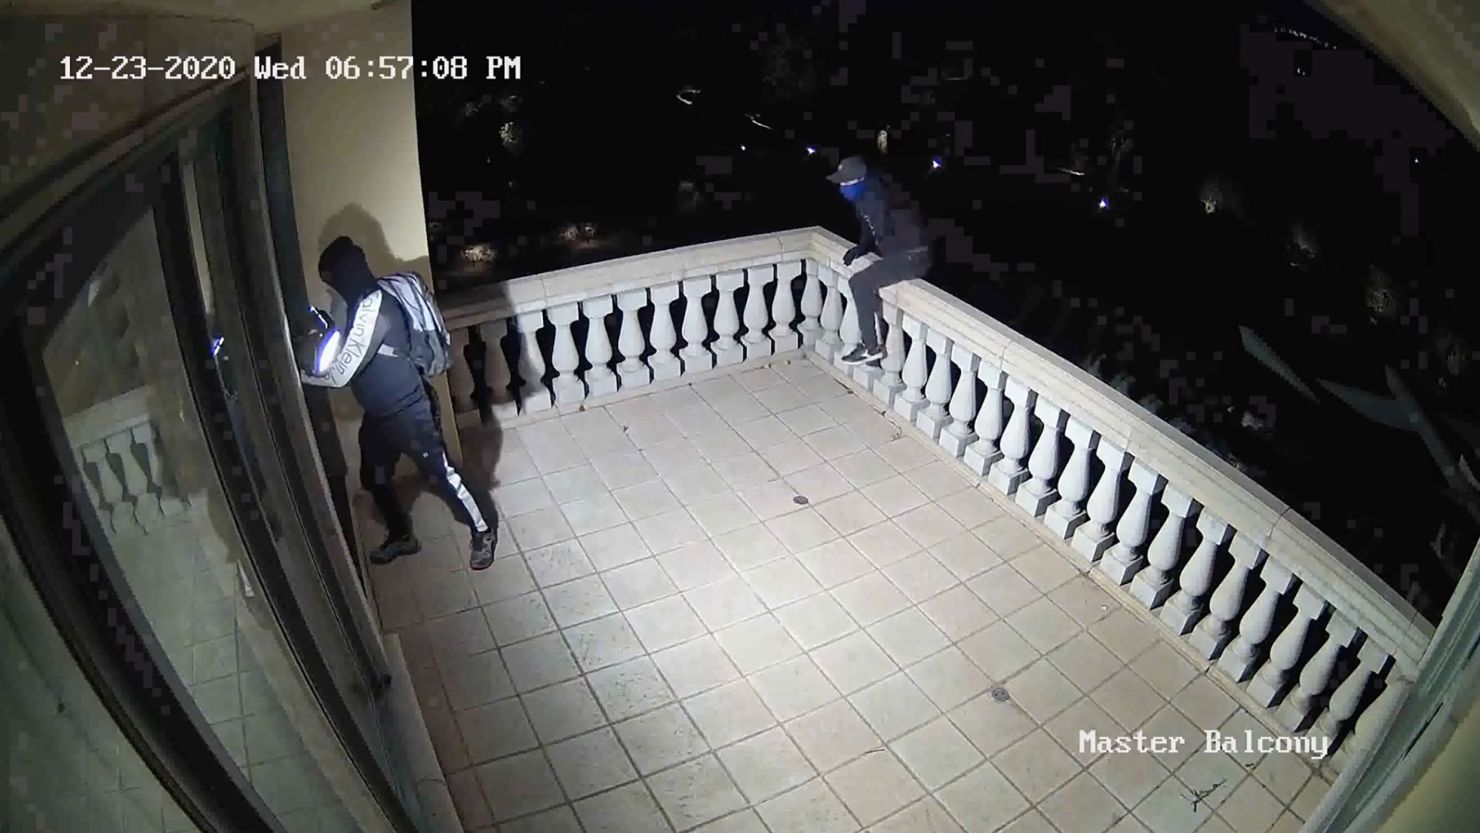 A group of thieves is seen breaking into a home through a window in the upper bedroom in a video released by the Orange County District Attorney's Office.